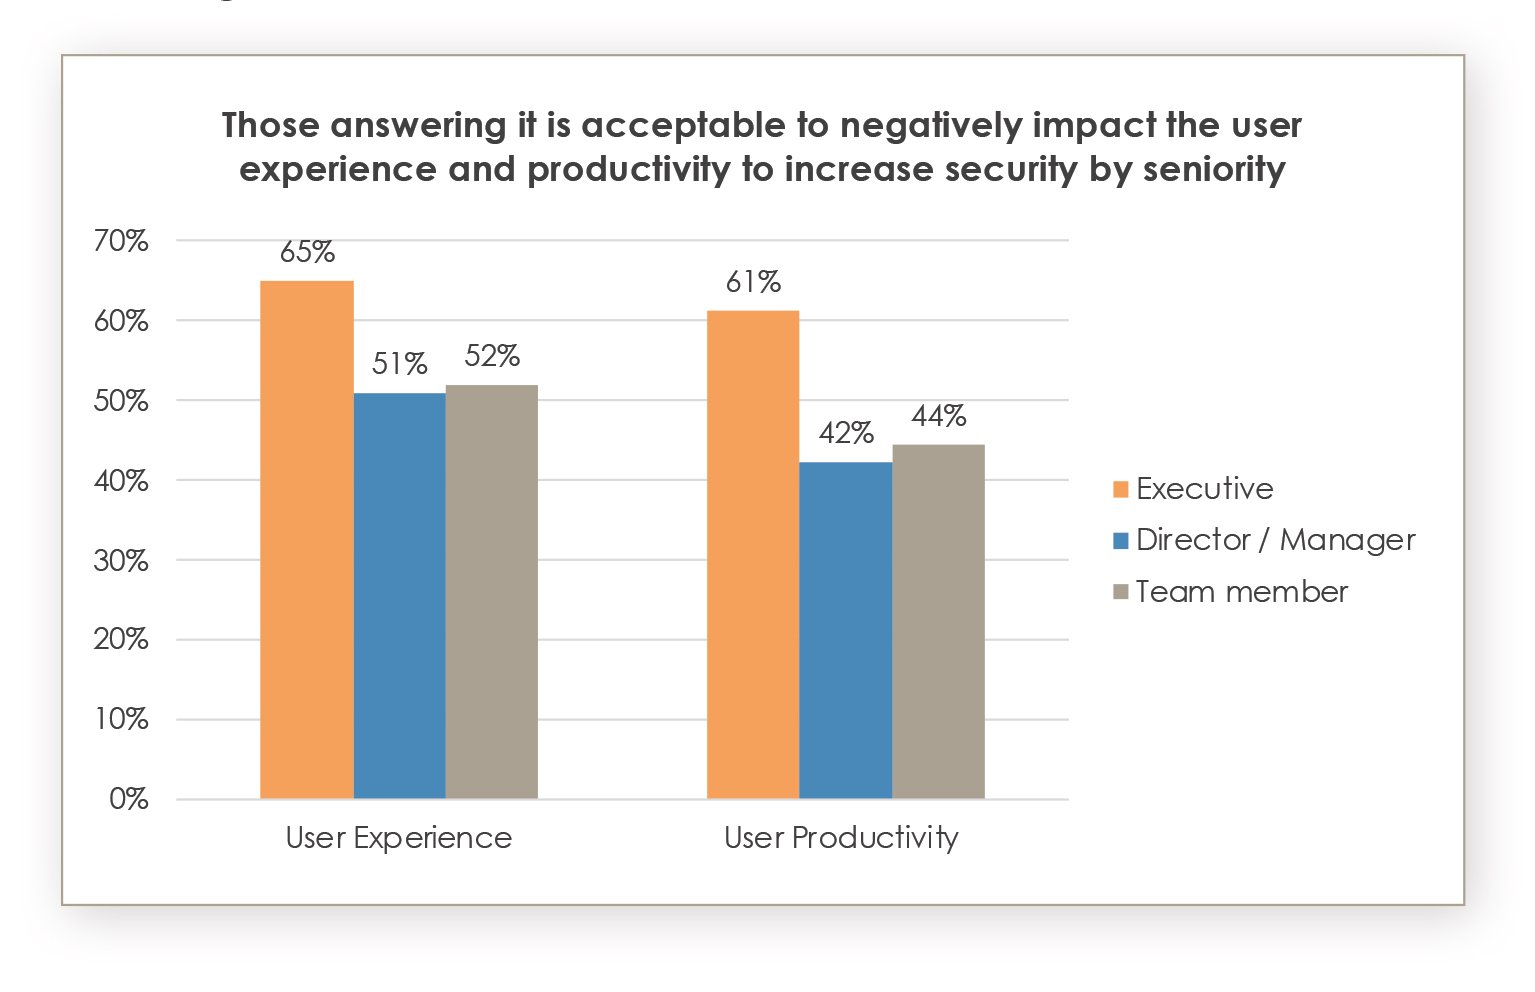 ESD_FY22_Academy-Blog.Optimizing Security and Digital Experiences - Why User Experience Monitoring is Key.Figure 1